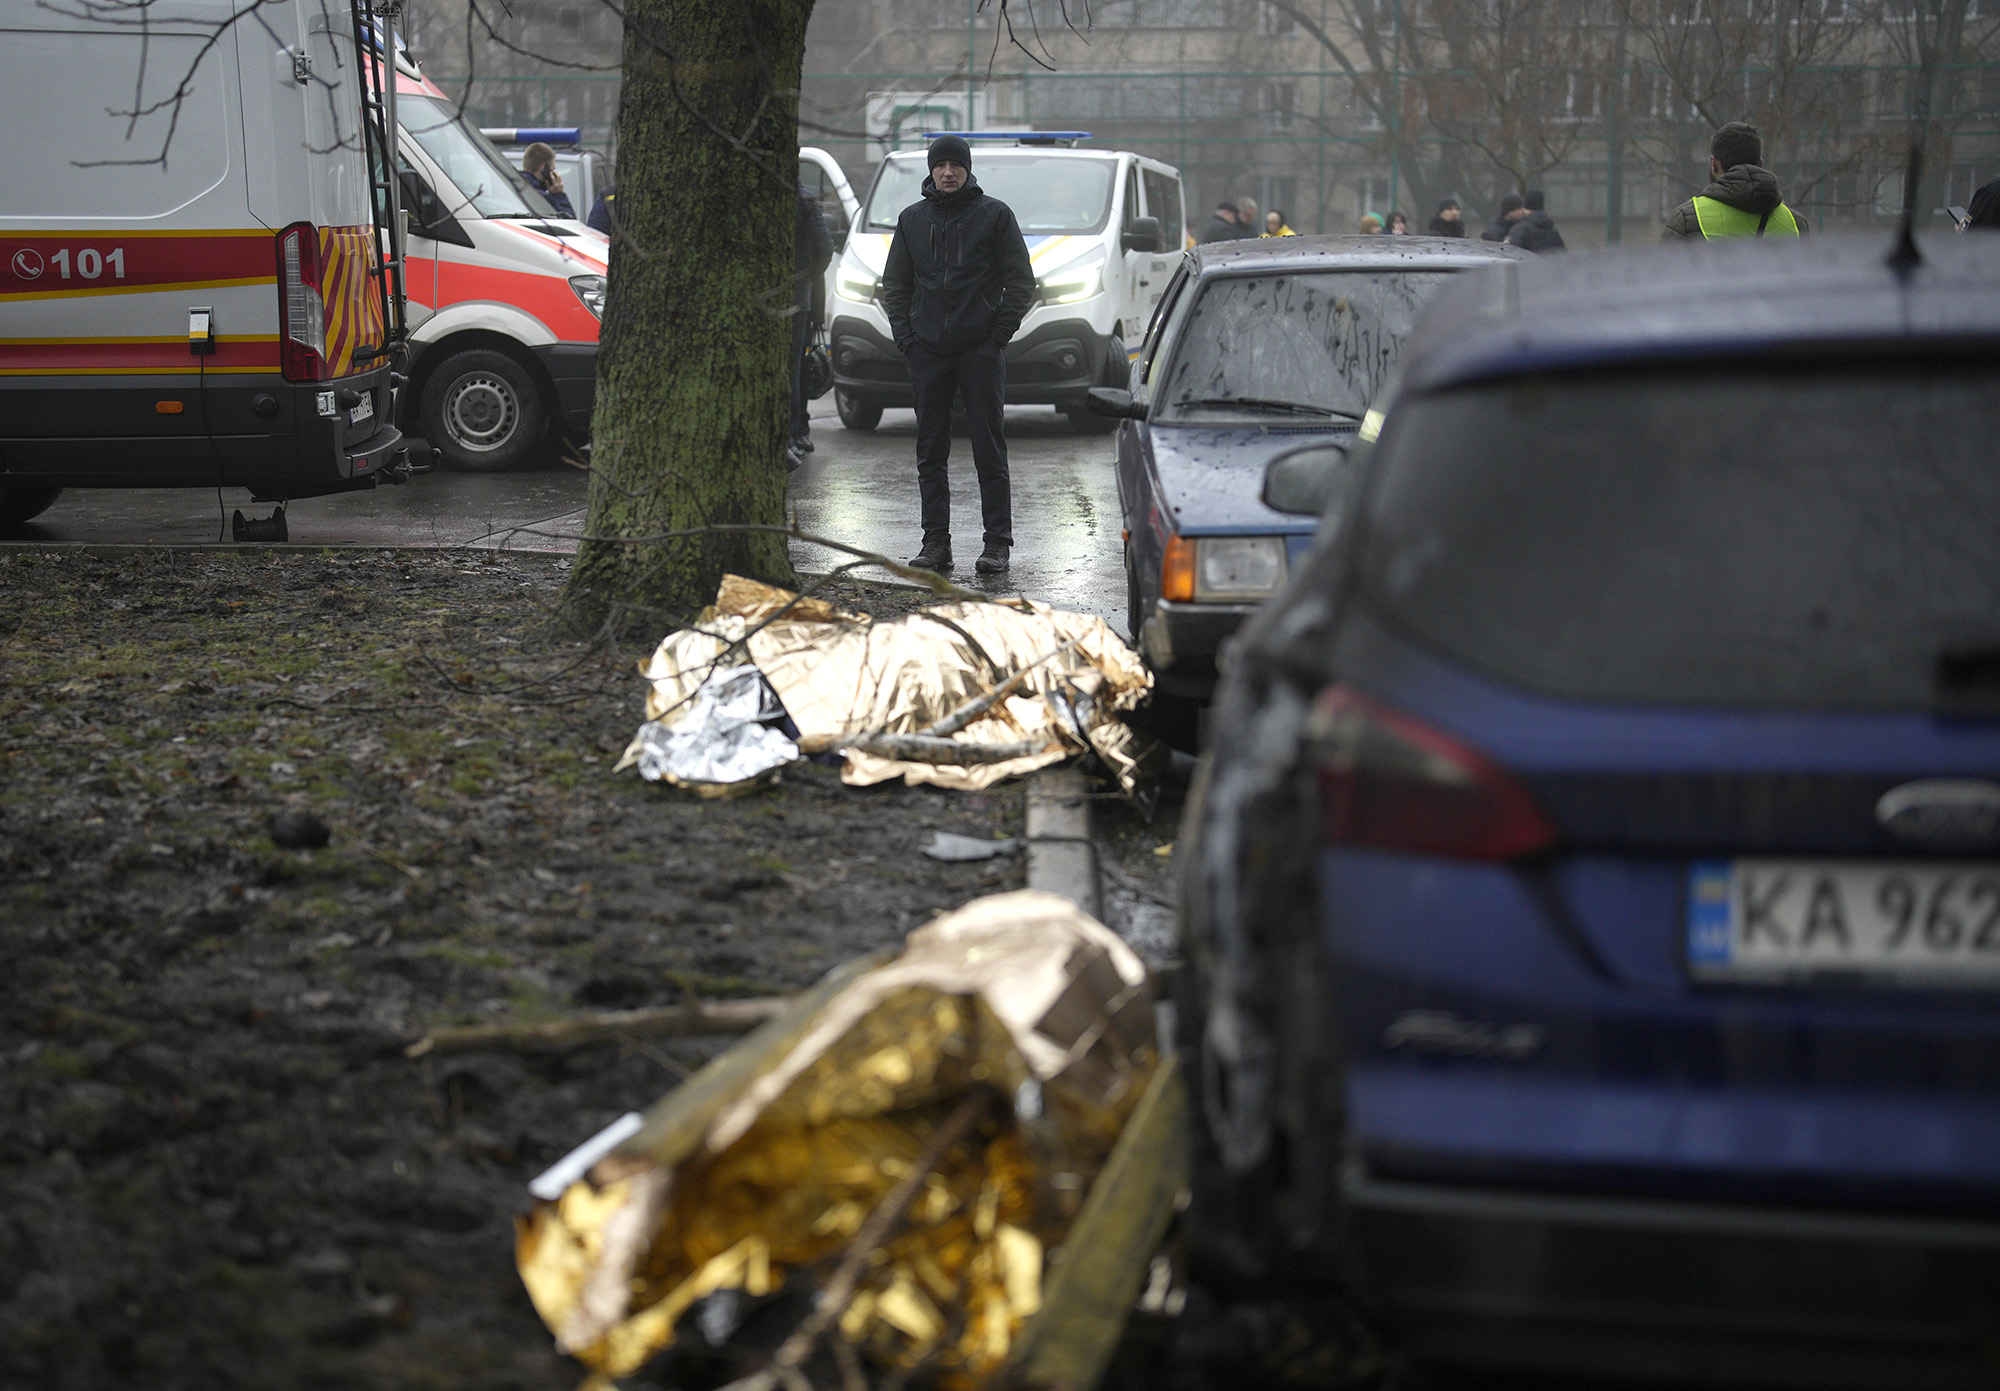 Covered bodies on the ground at the scene where a helicopter crashed in Brovary, on the outskirts of Kyiv, Ukraine, on January 18.